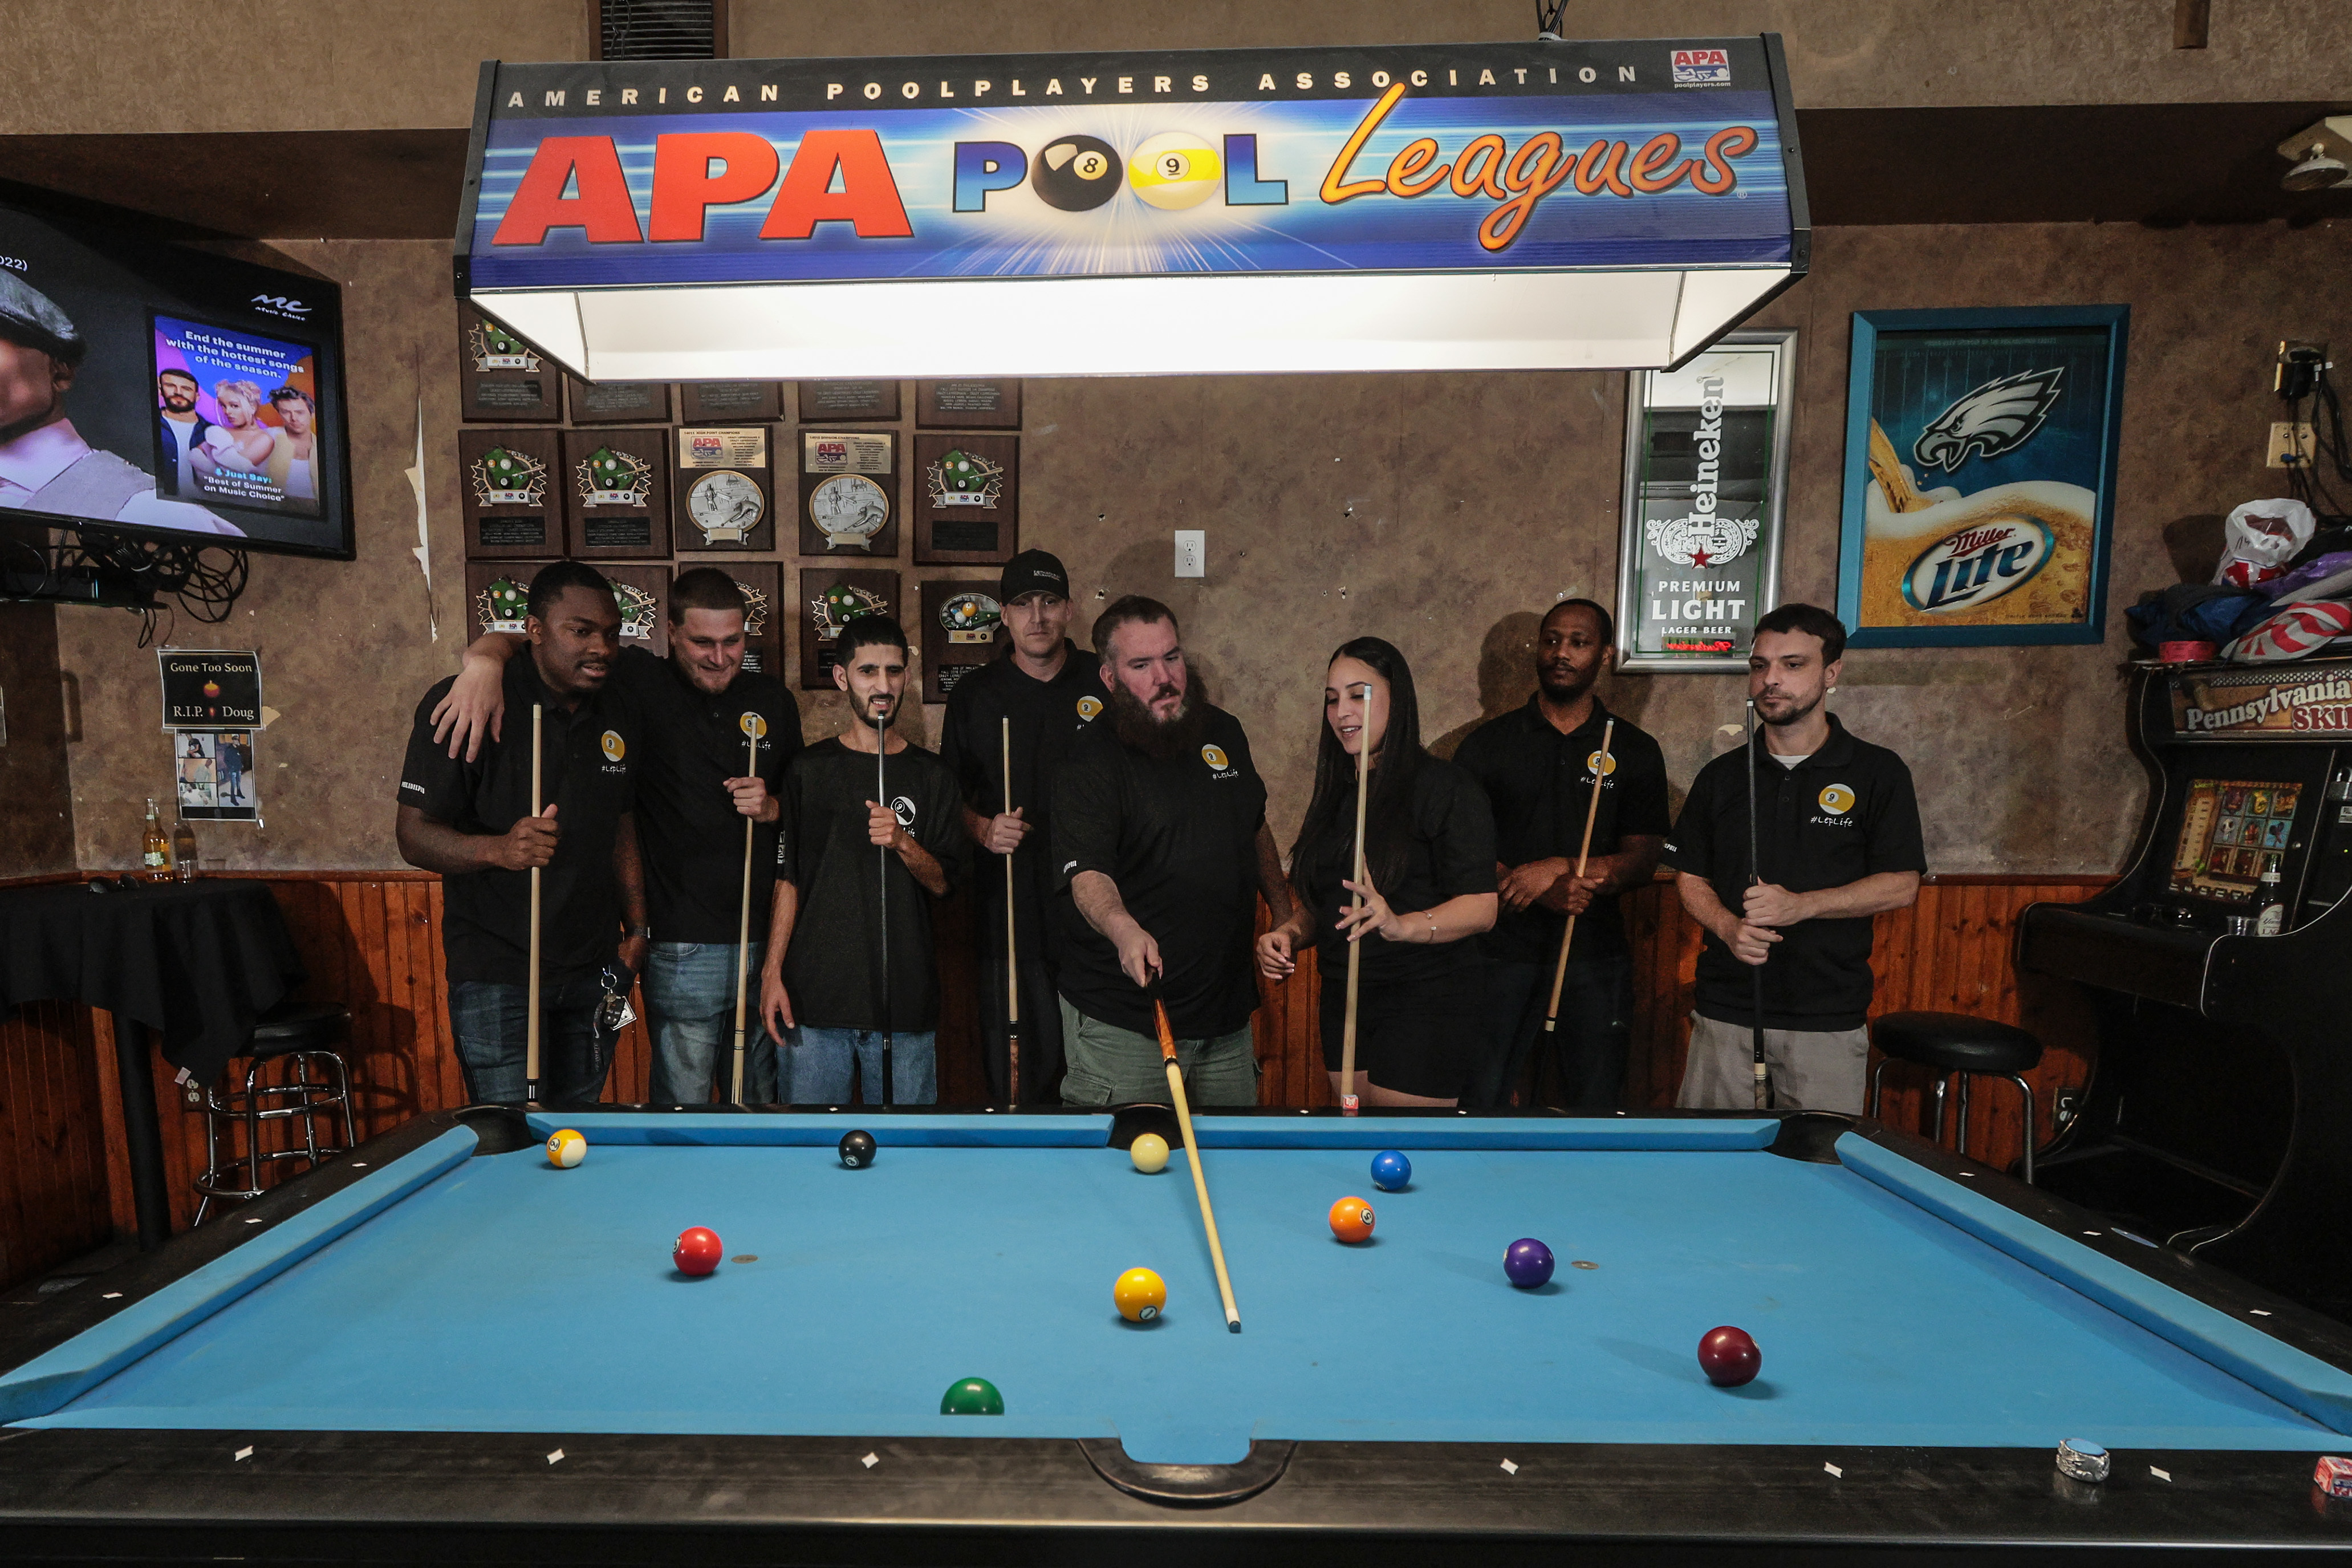 Philly comes in first at the World Pool Championship in Las Vegas